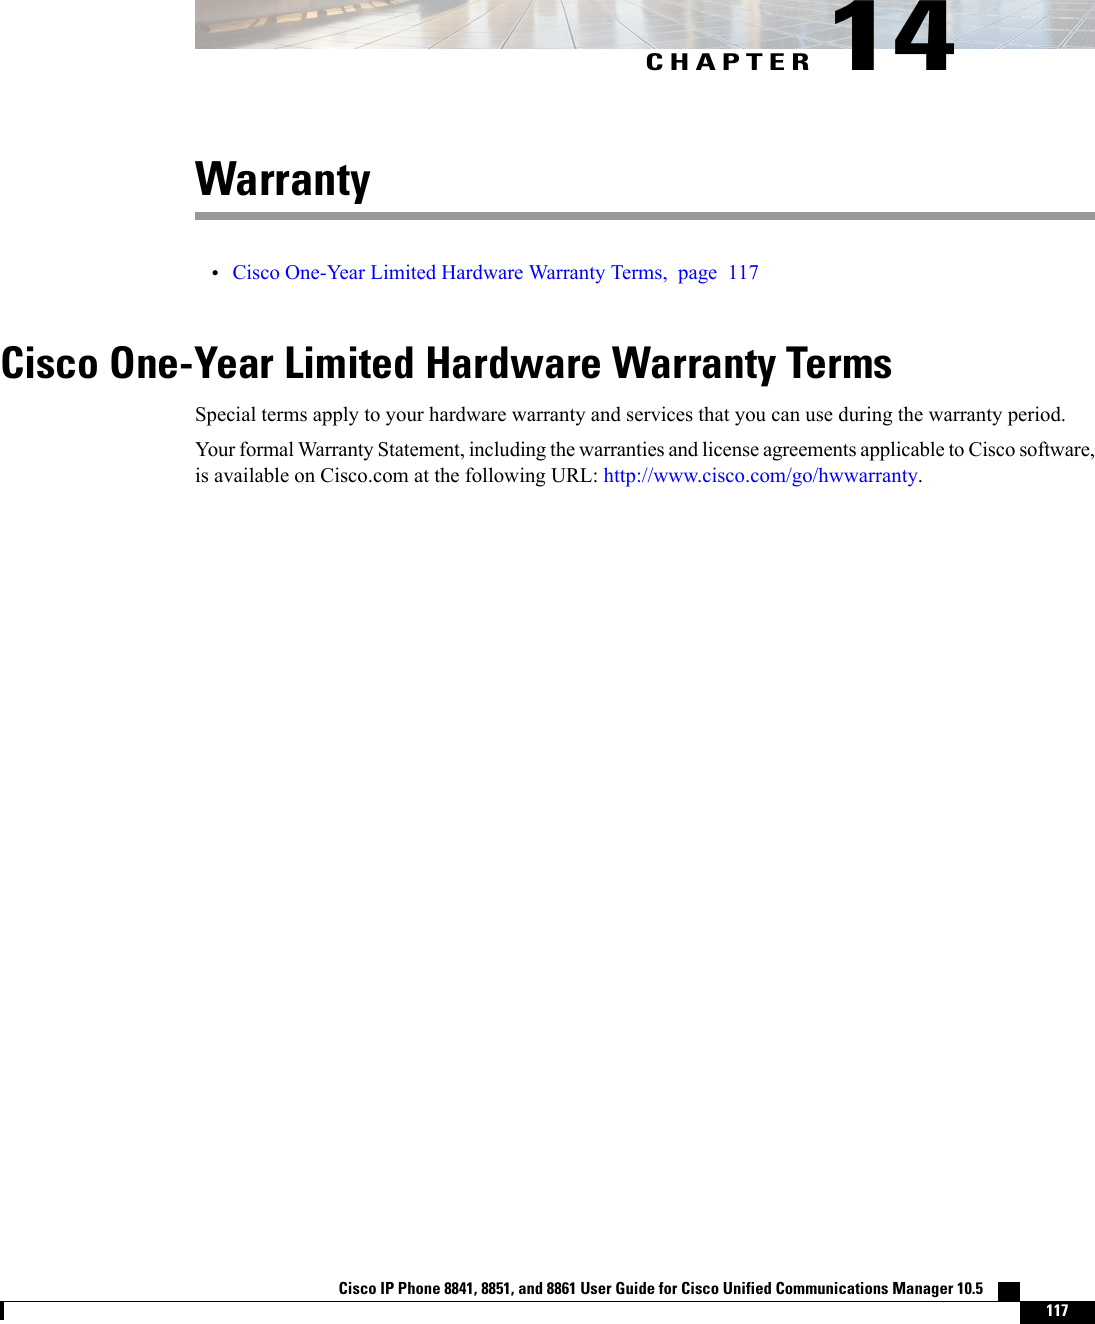 CHAPTER 14Warranty•Cisco One-Year Limited Hardware Warranty Terms, page 117Cisco One-Year Limited Hardware Warranty TermsSpecial terms apply to your hardware warranty and services that you can use during the warranty period.Your formal Warranty Statement, including the warranties and license agreements applicable to Cisco software,is available on Cisco.com at the following URL: http://www.cisco.com/go/hwwarranty.Cisco IP Phone 8841, 8851, and 8861 User Guide for Cisco Unified Communications Manager 10.5    117